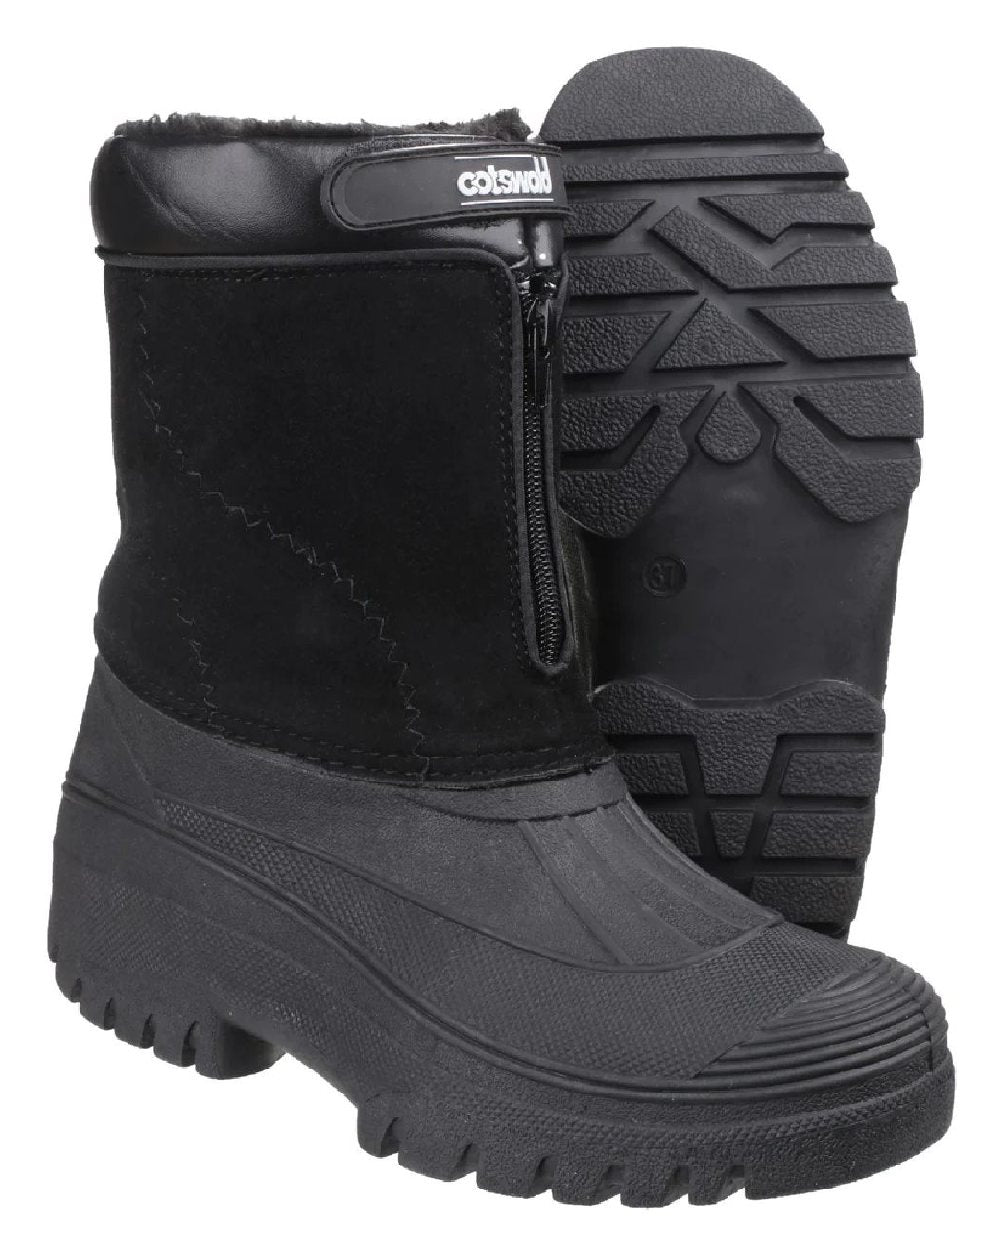 Black coloured Cotswold Mens Venture Waterproof Winter Boots on white background 